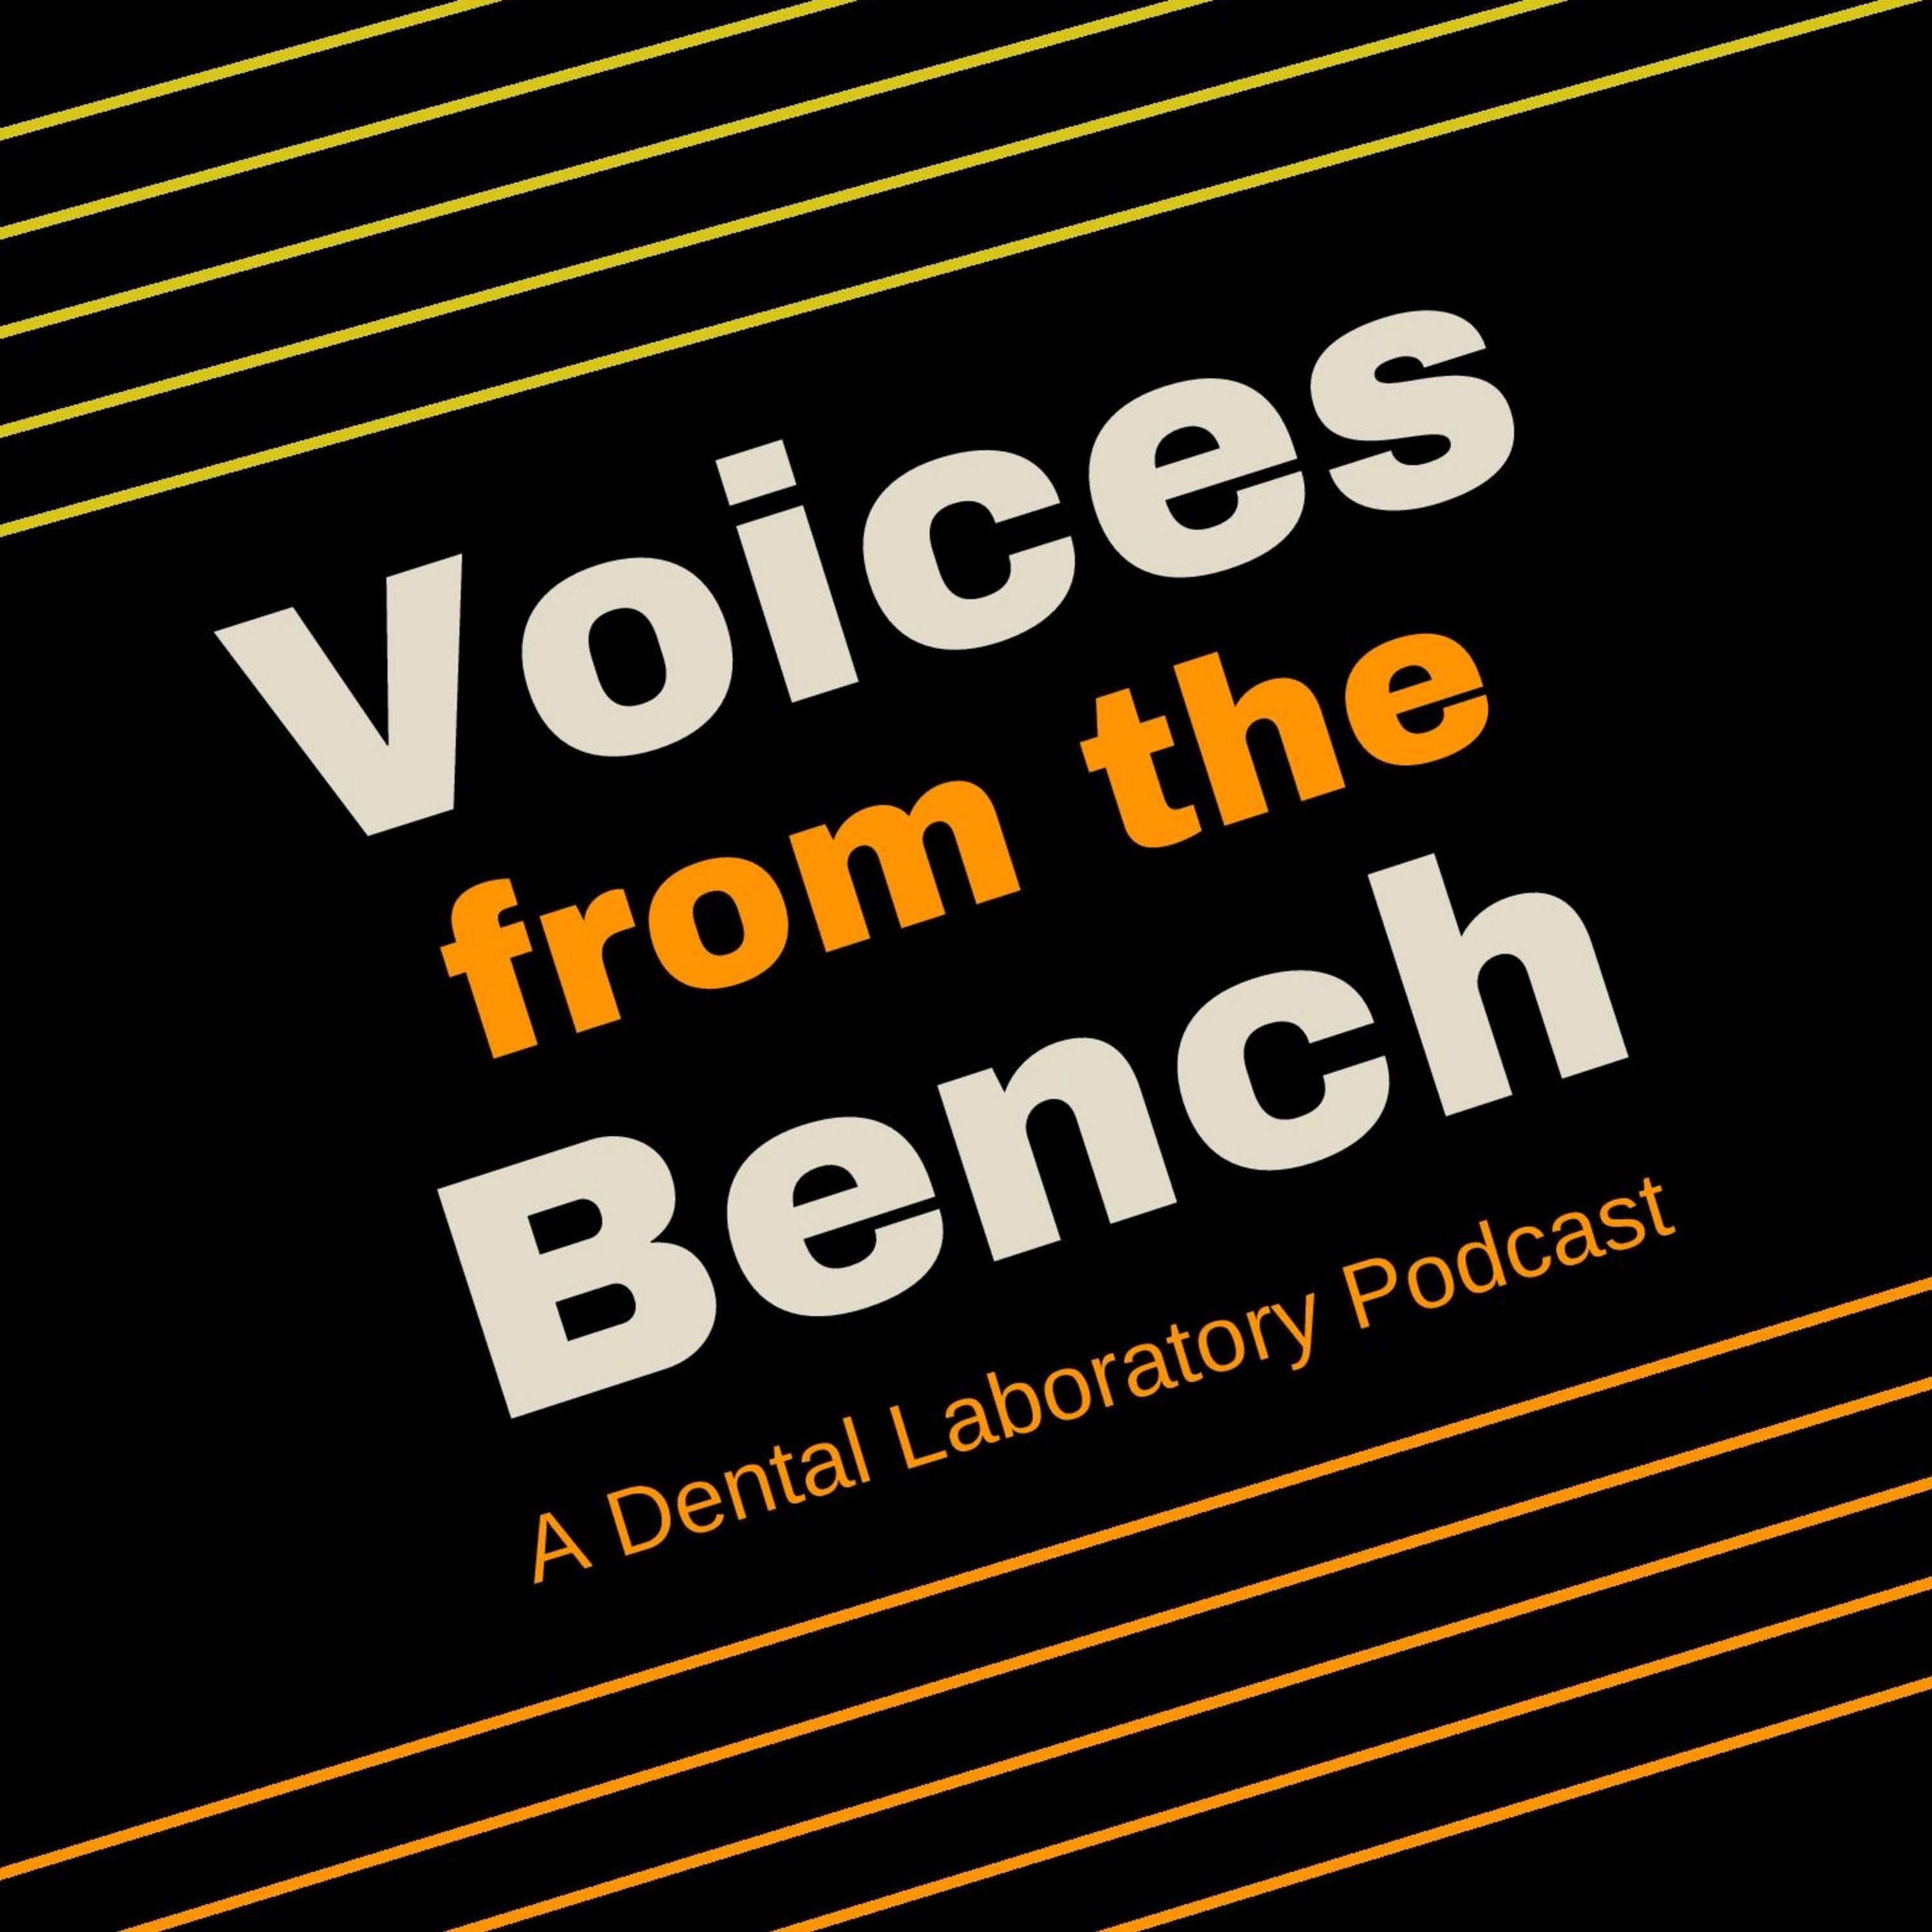 93: From Lab to Argen to Lab : At the ECDL with Donnie Bridges and Joshua Fitzgerald